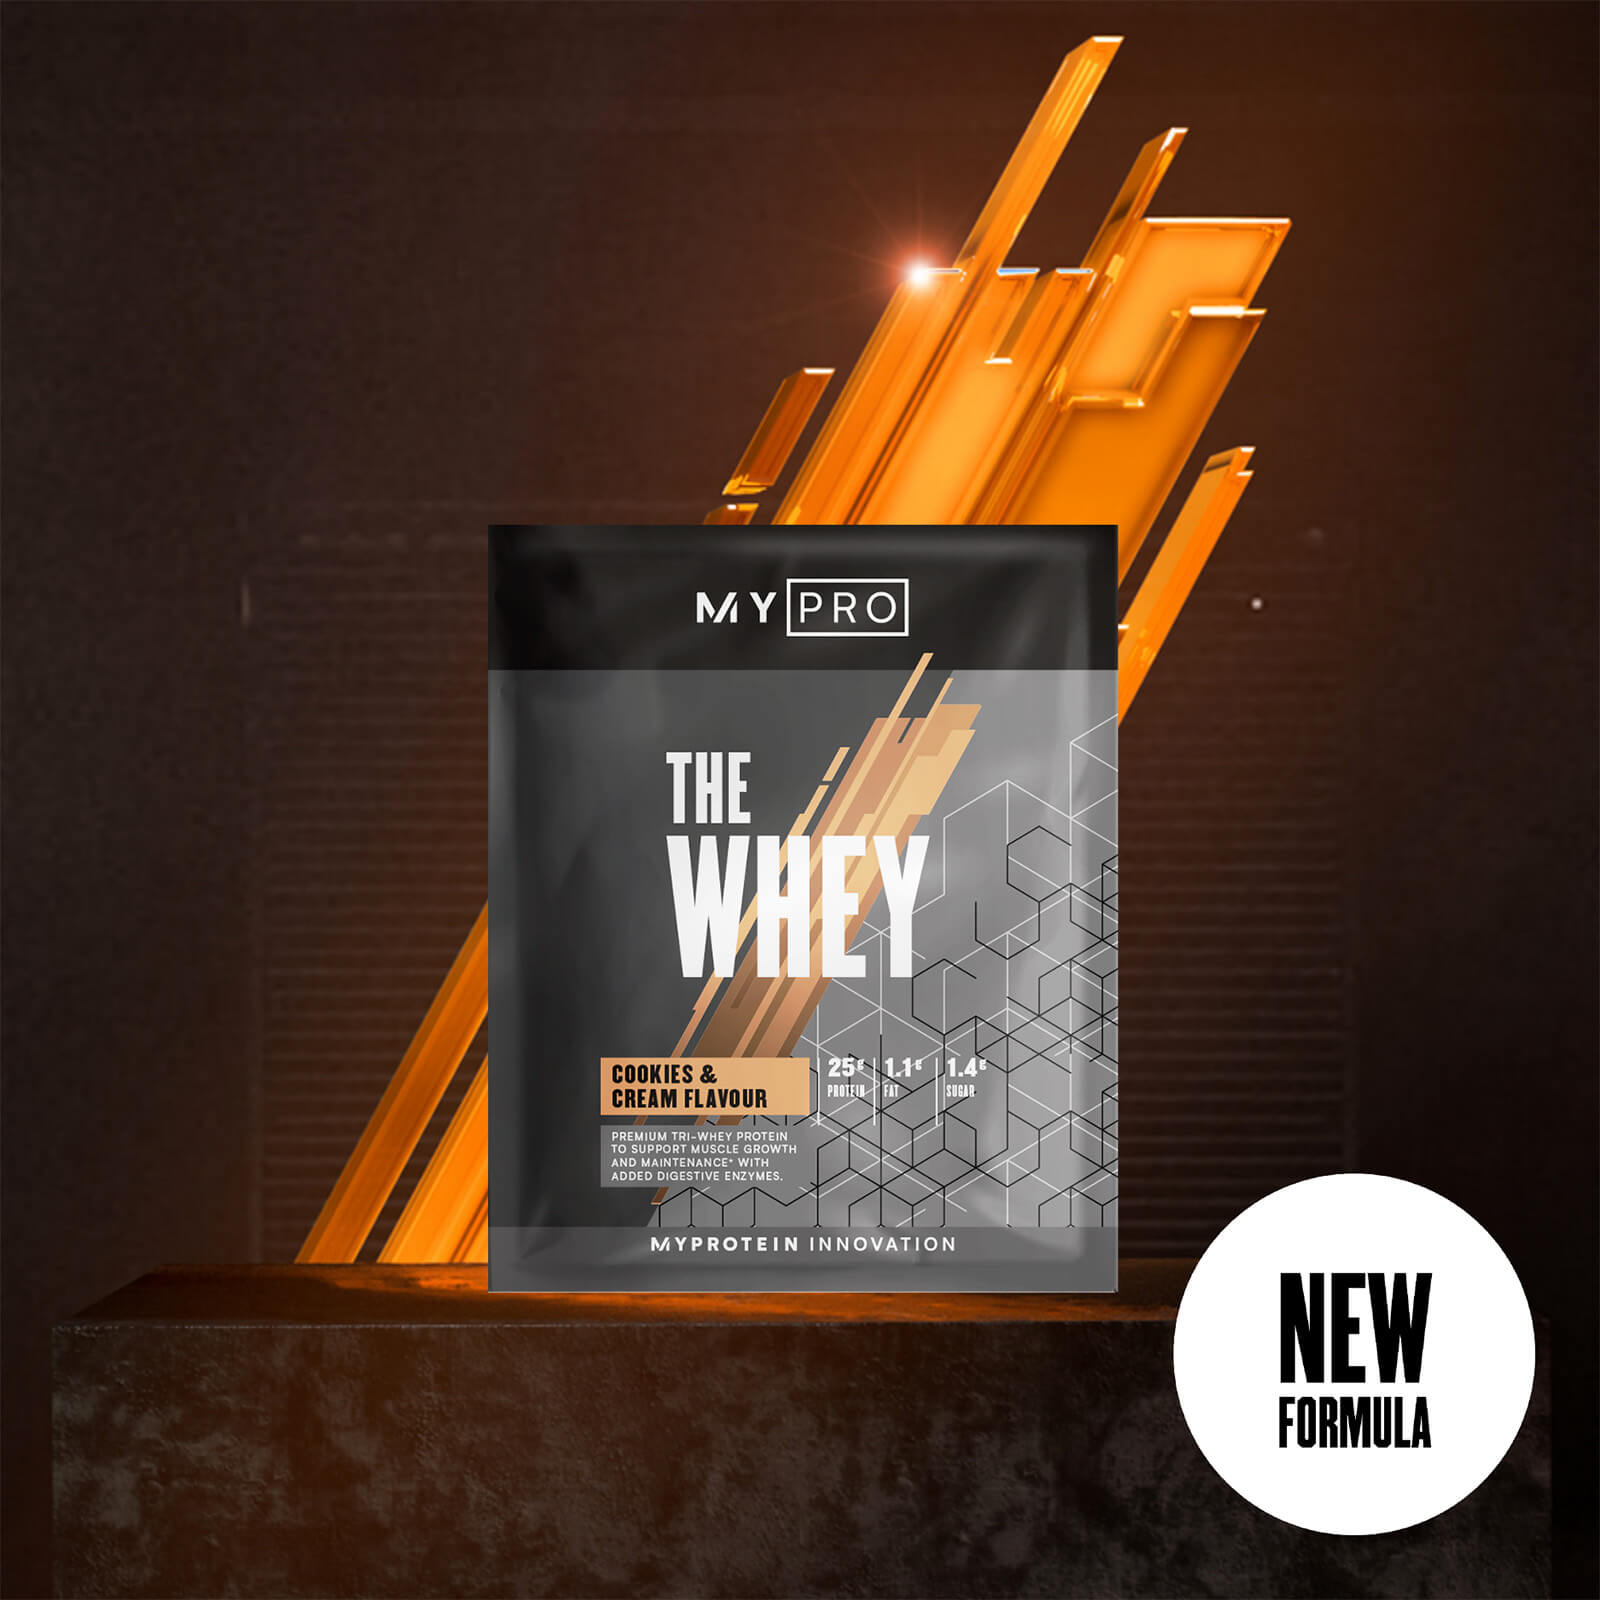 THE Whey (Sample) - 30g - Cookies and Cream